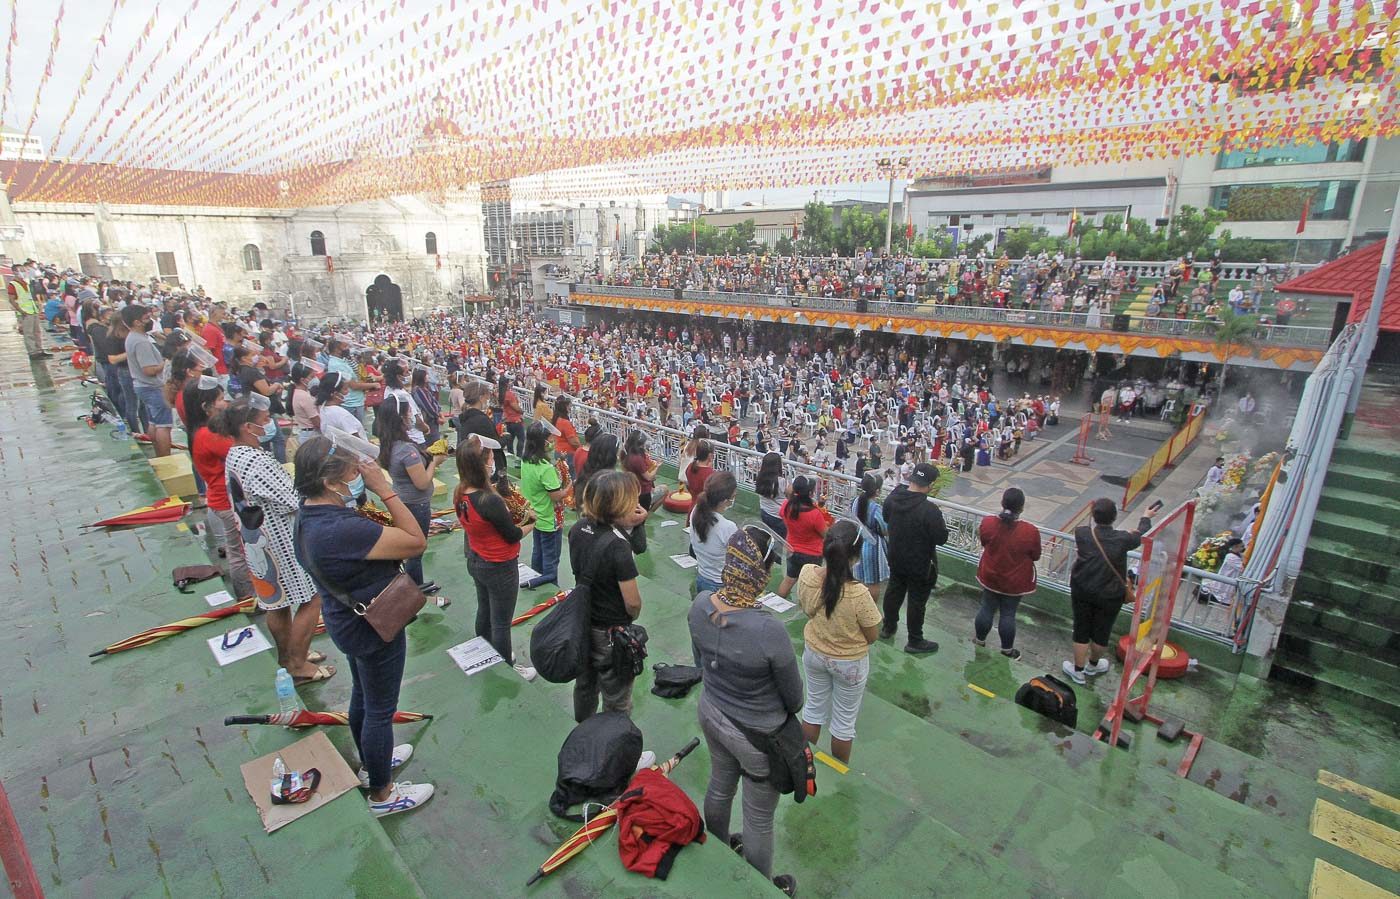 Fiesta Señor in Cebu: ‘What can you do to end pandemic?’